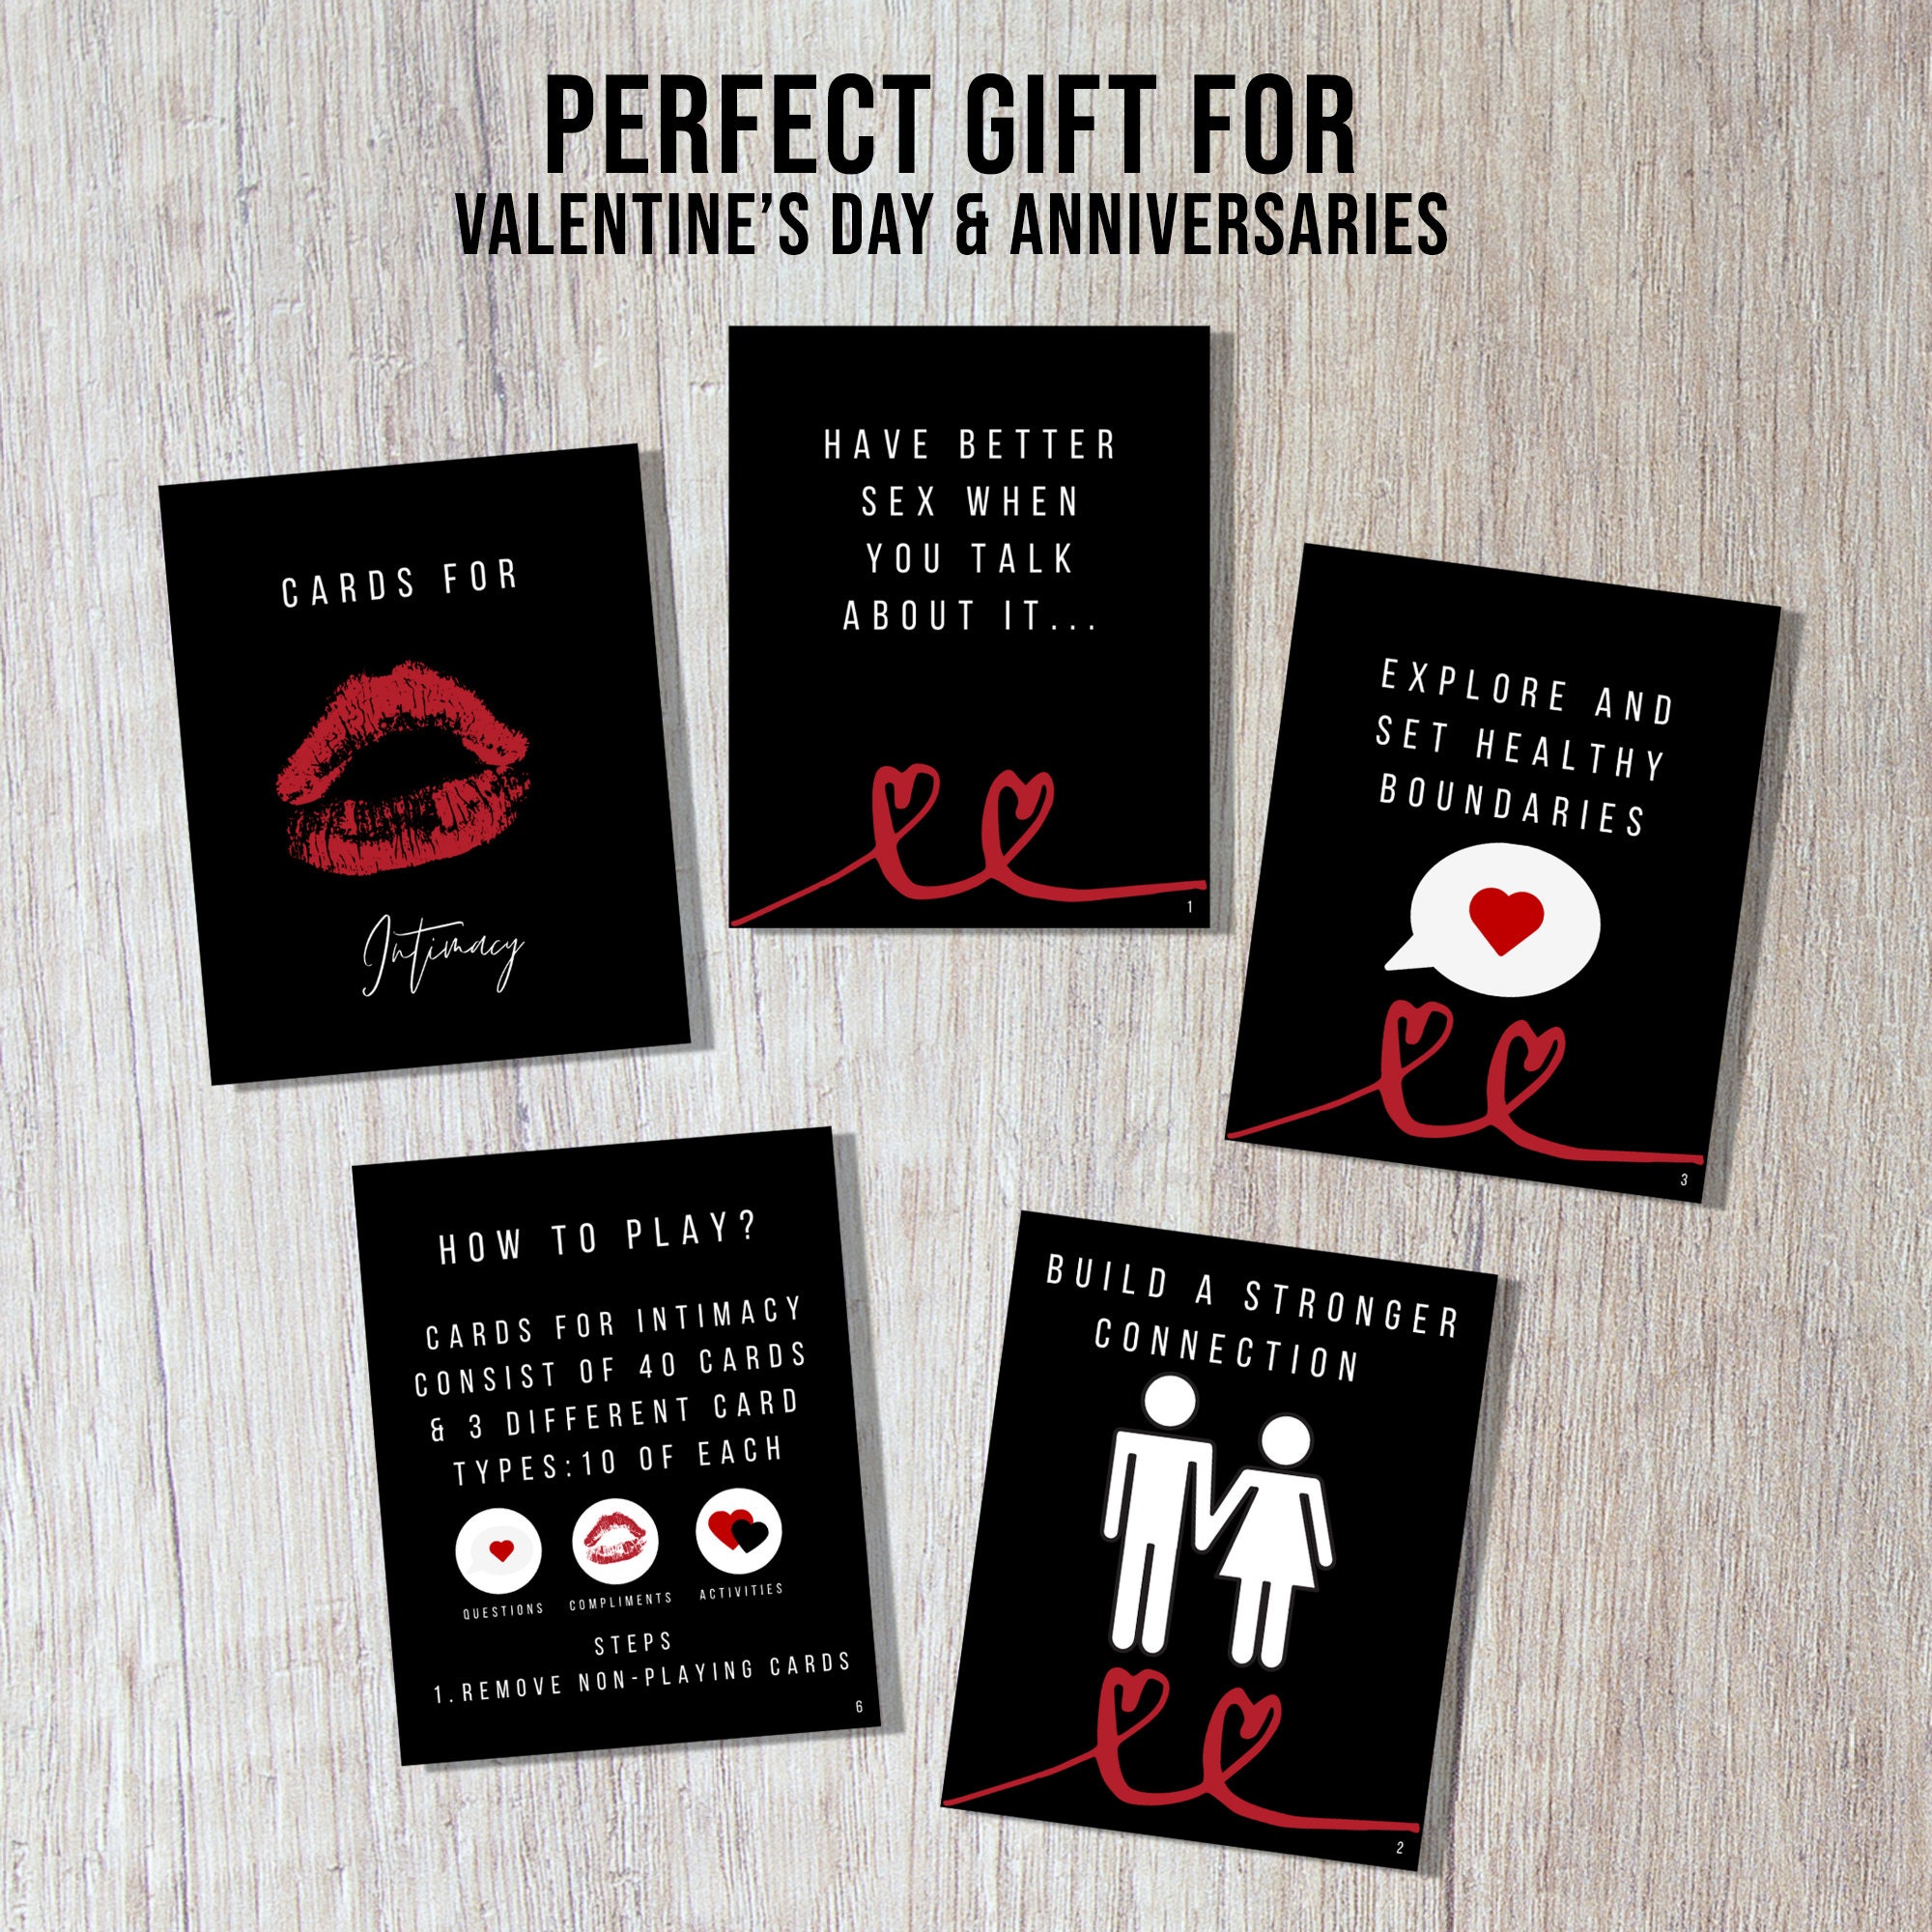 Printable Sex Card Game for Couples Intimate Card Game